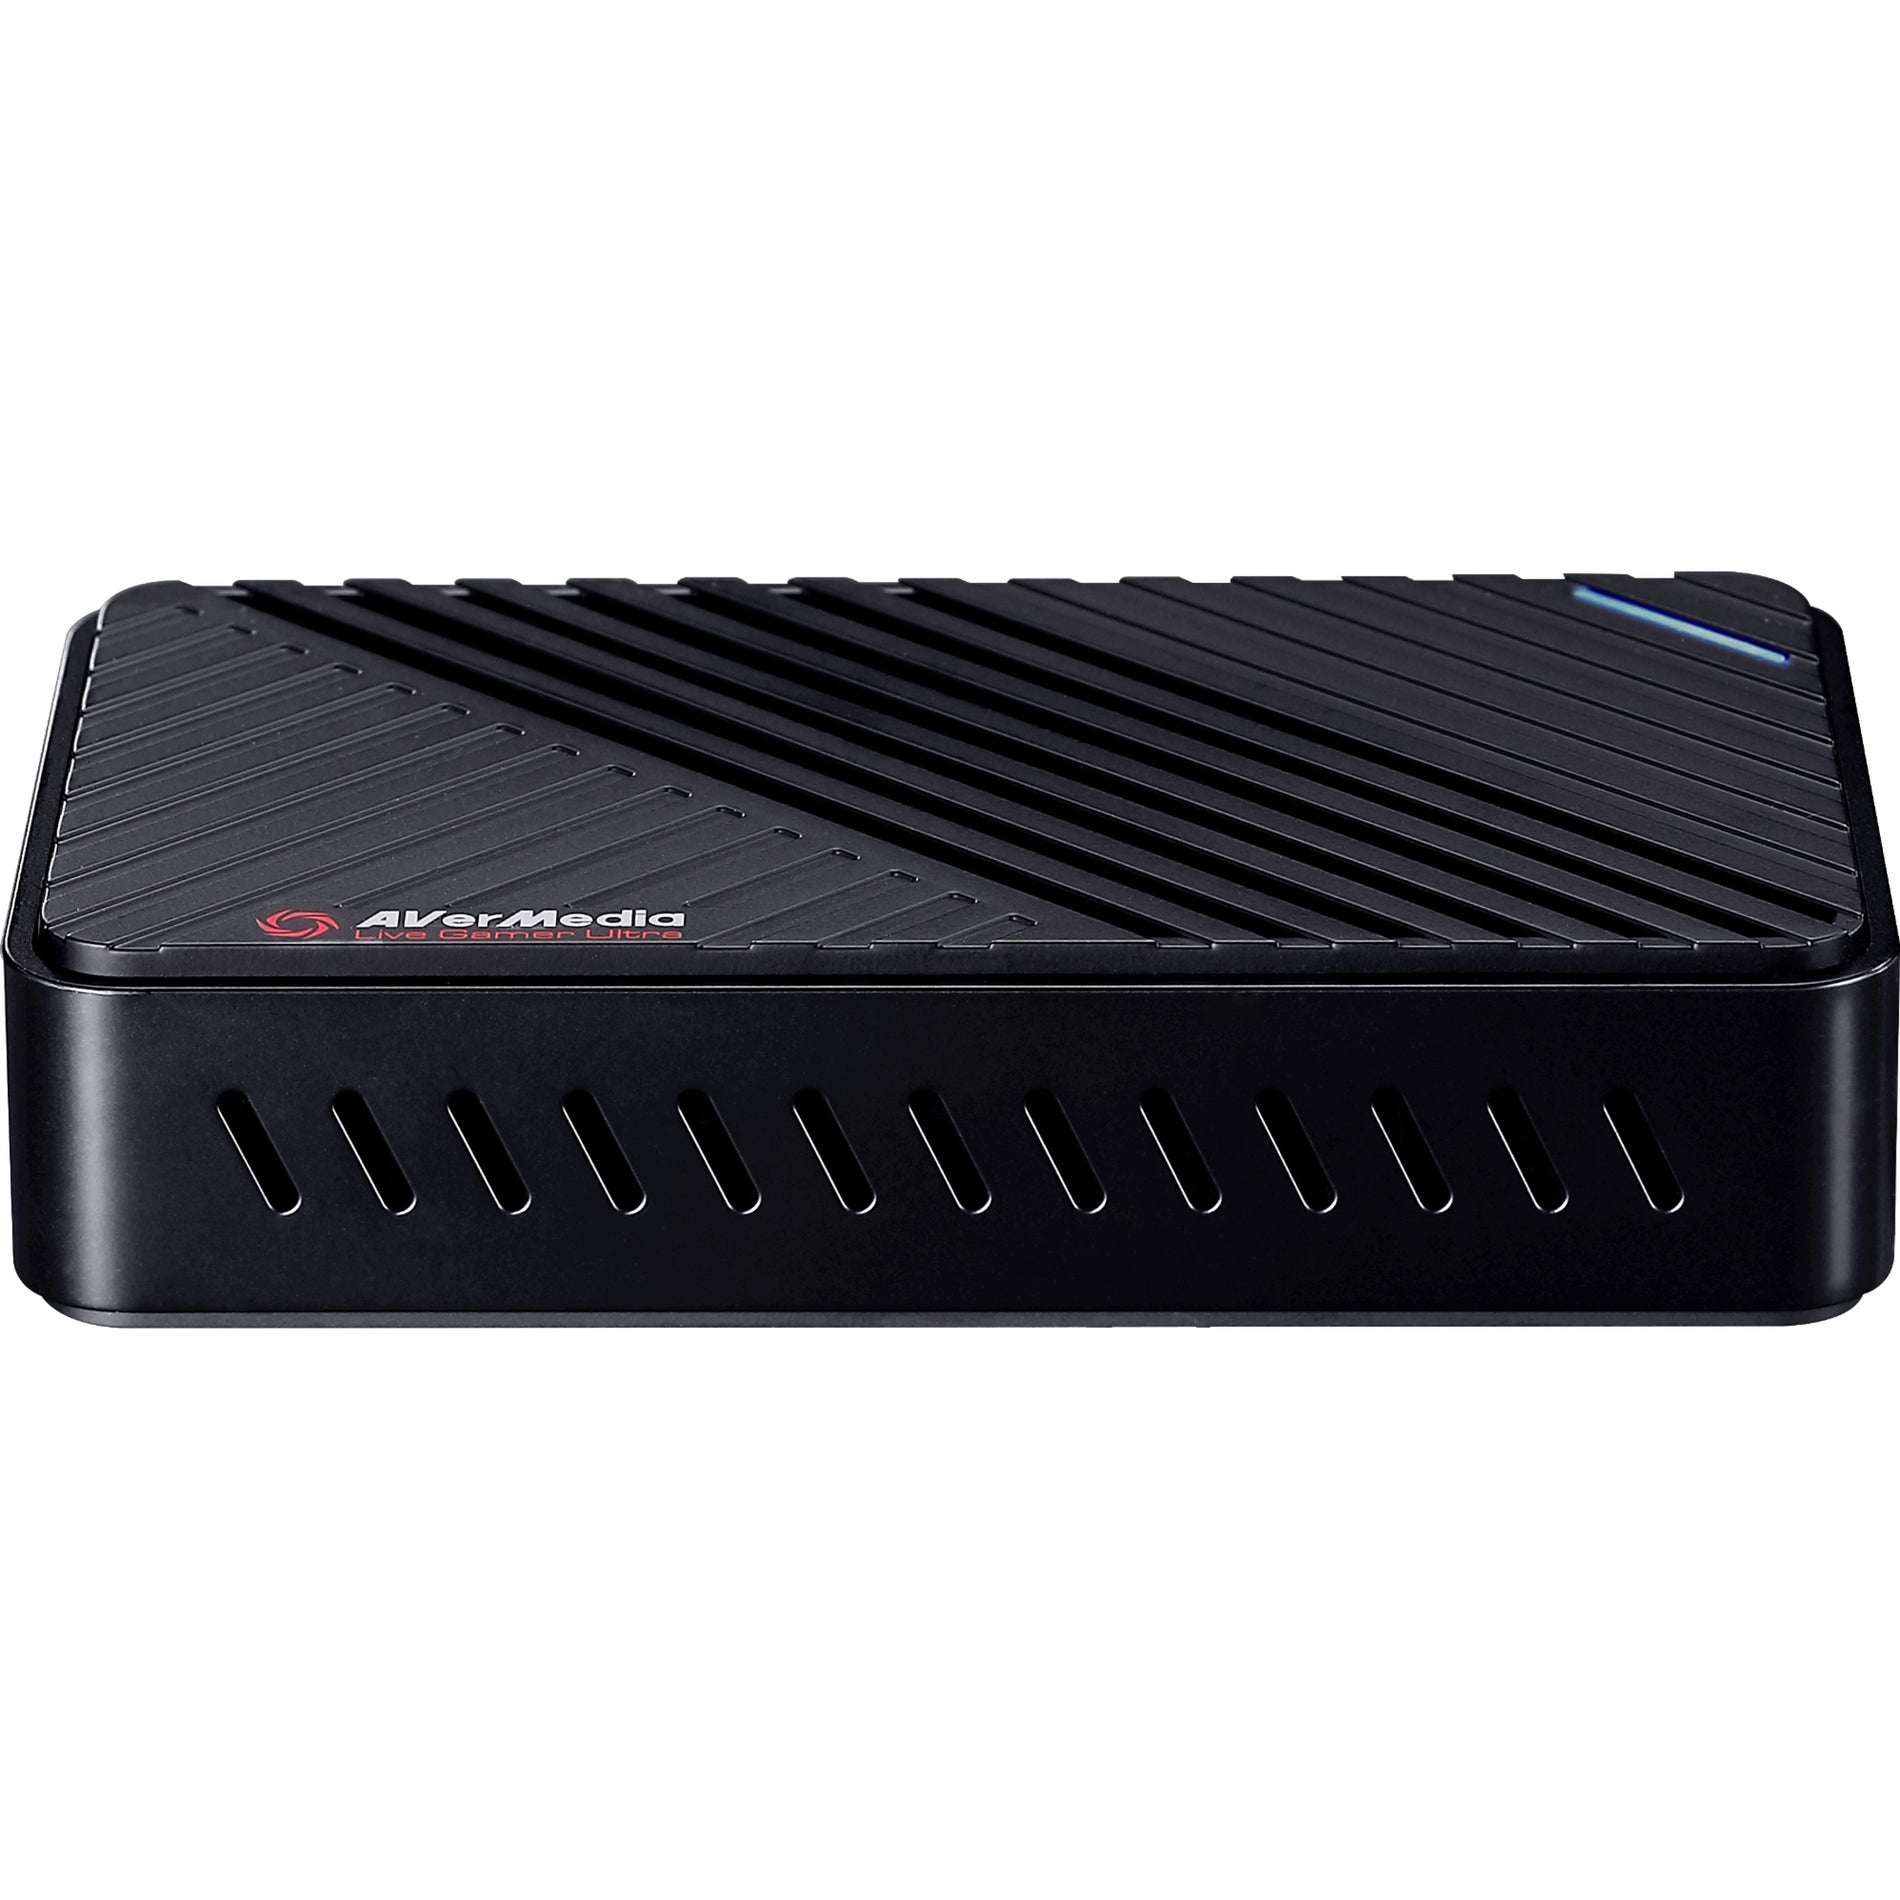 AVerMedia GC553 Live Gamer Ultra Game Capturing Device, Video Streaming, Video Recording